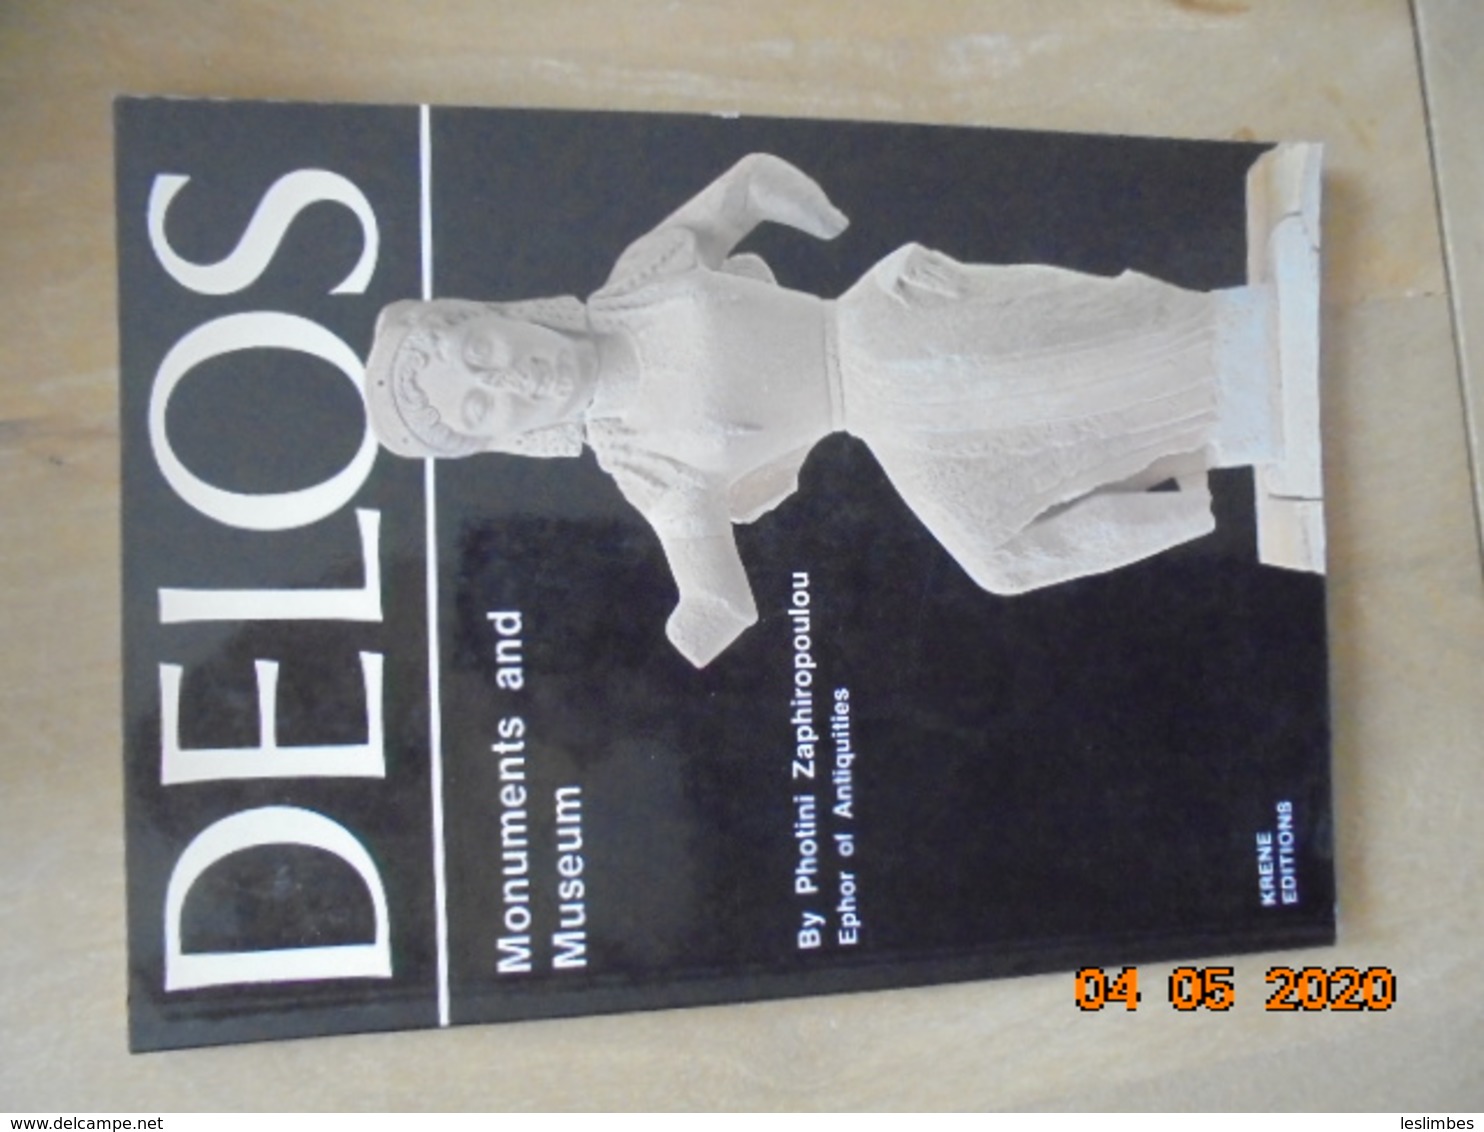 Delos: Monuments And Museum By Photini Zaphiropoulou. Krene Editions, 1983. Greece - Voyage/ Exploration